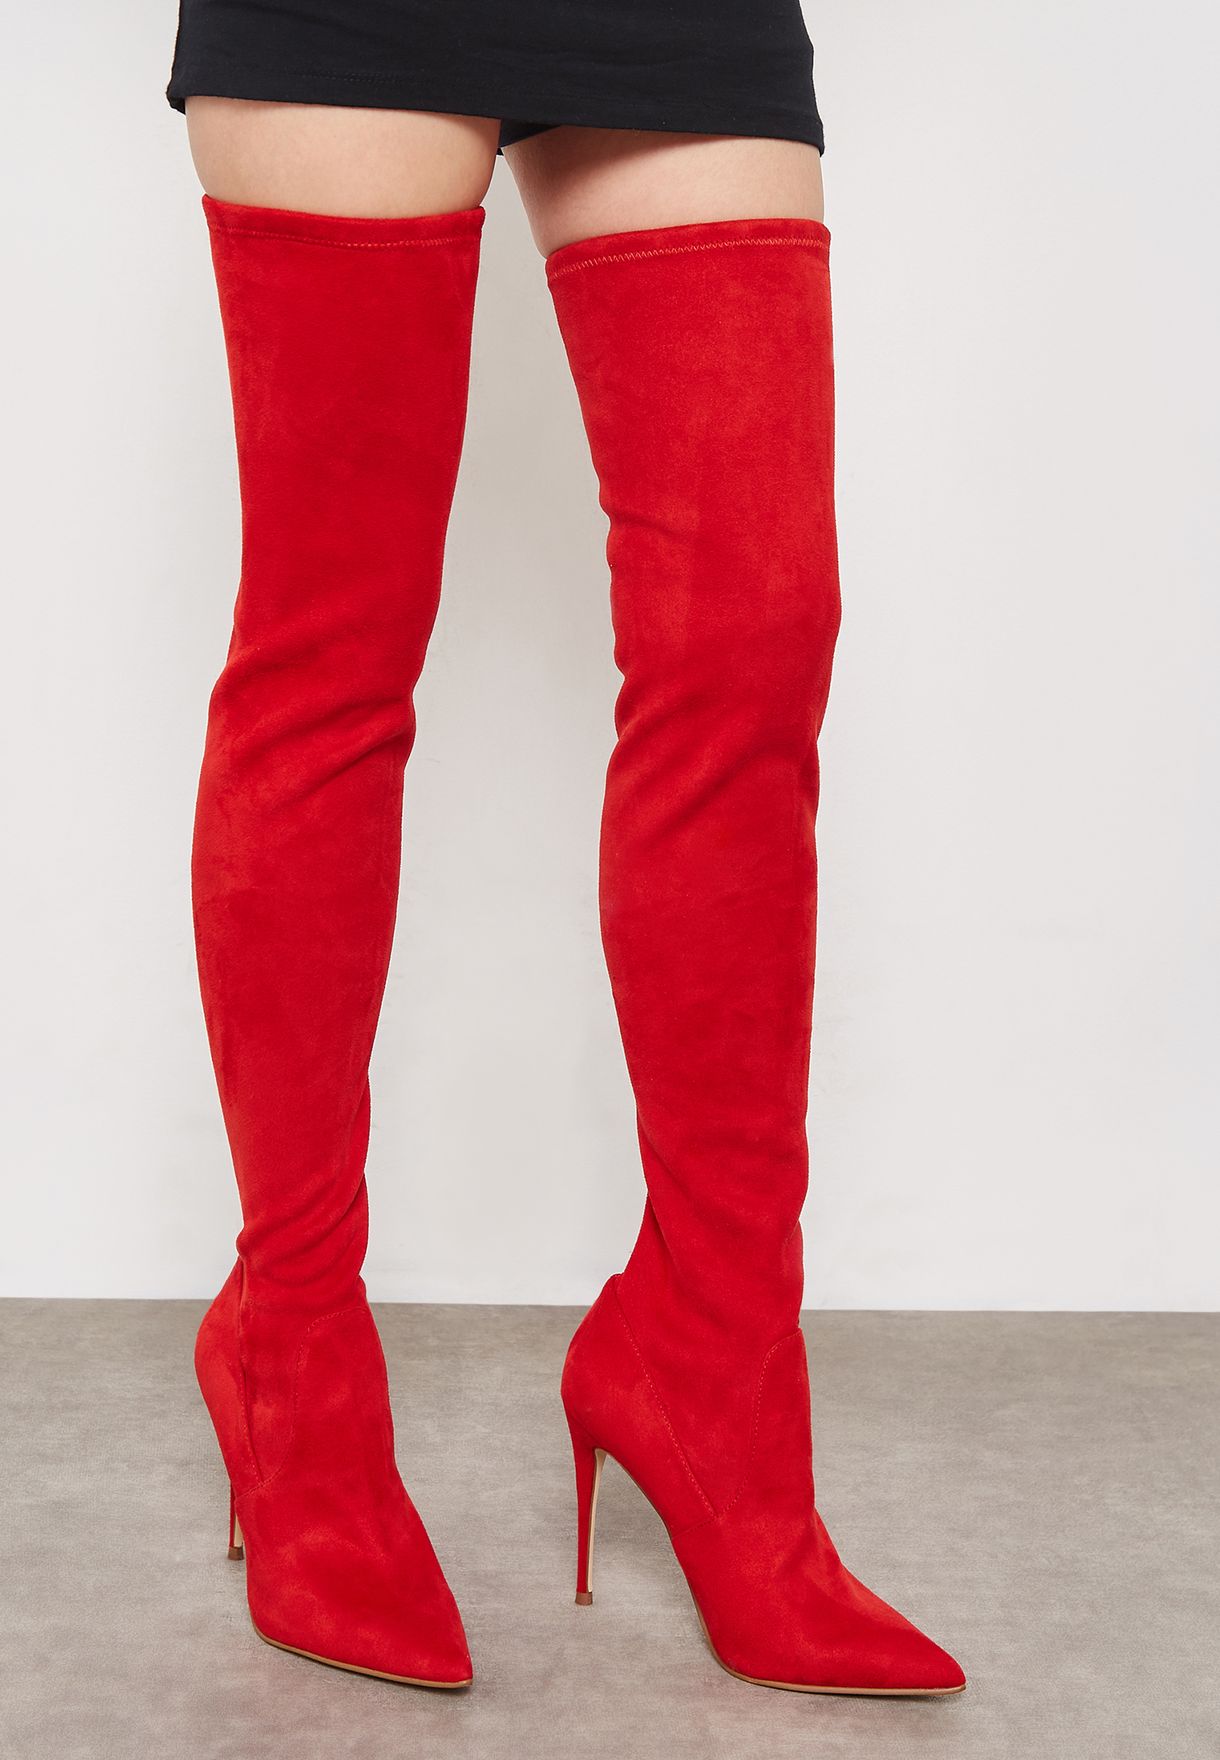 red booties steve madden